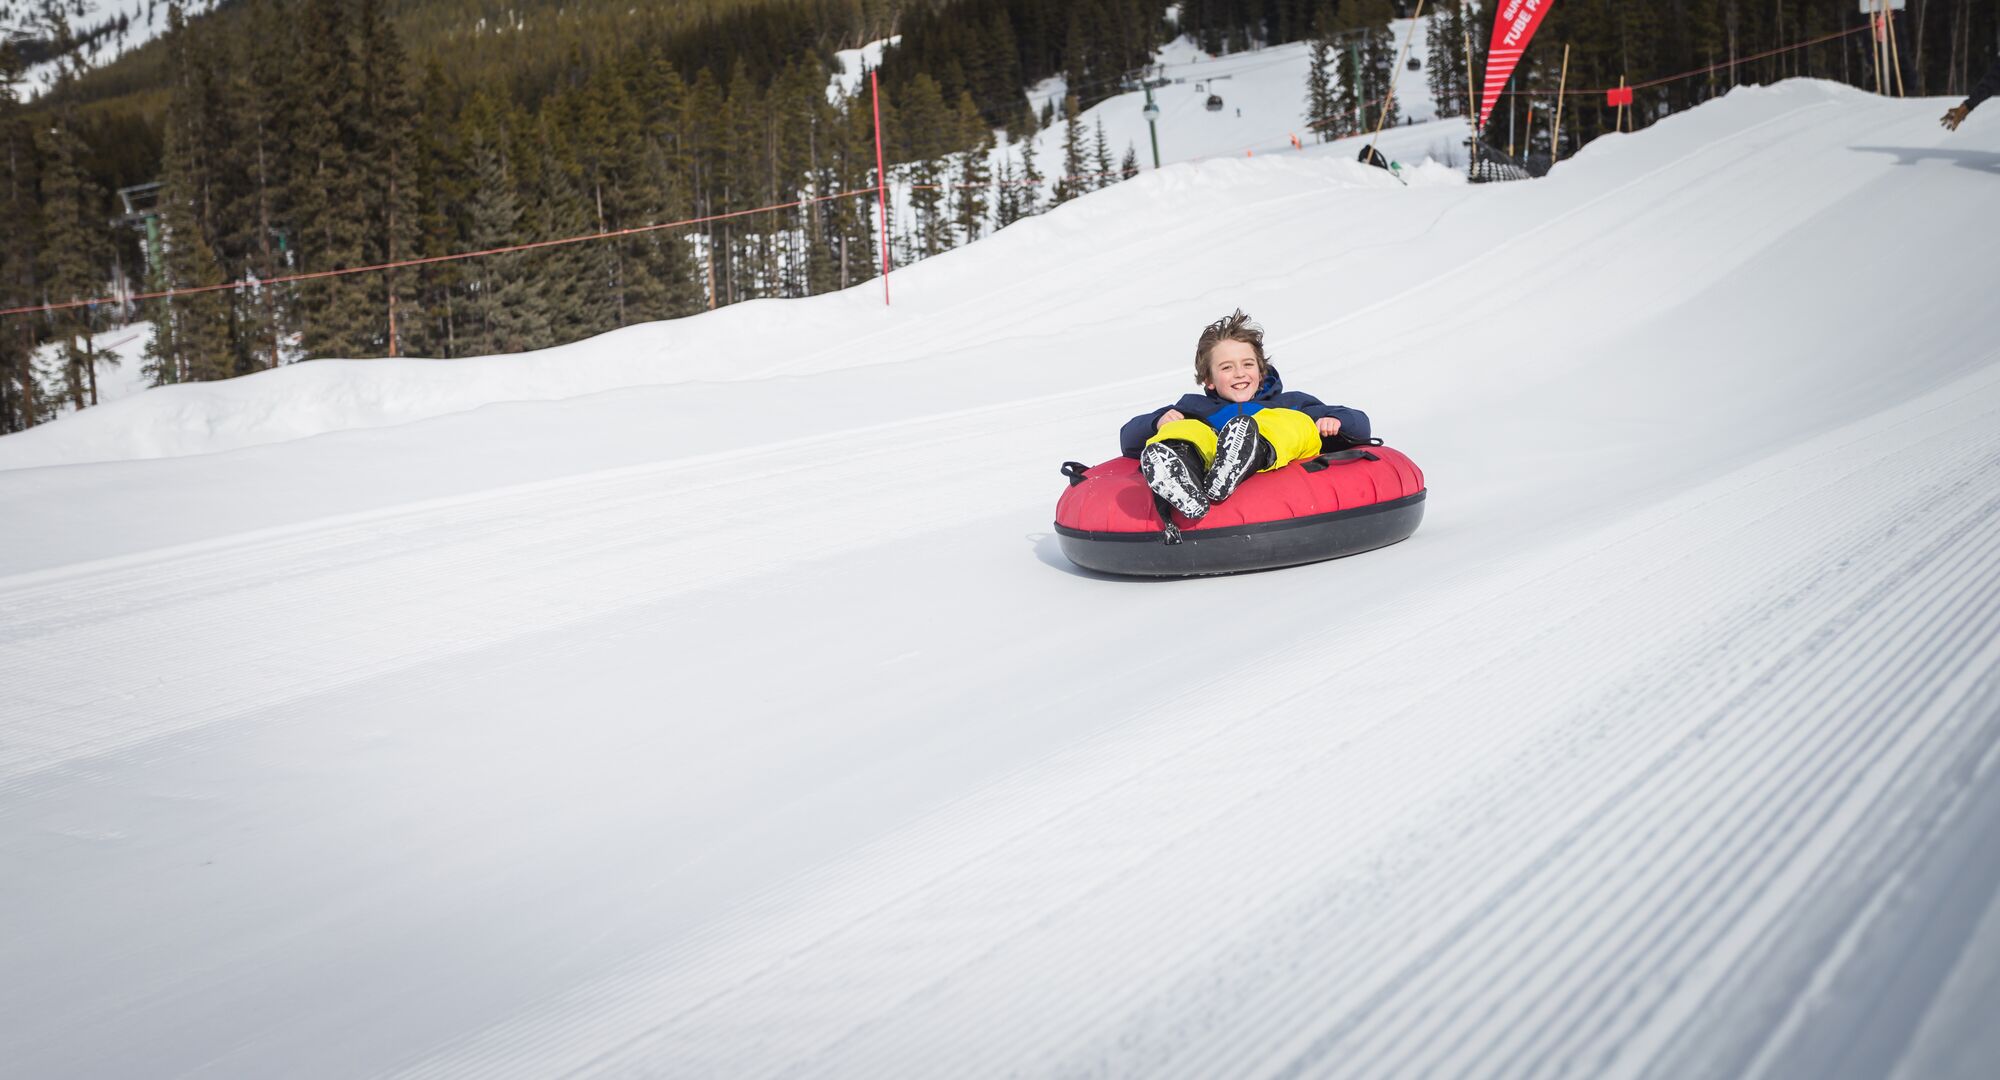 A kind whizzing down a snow slope in a tube at the Lake Louise Ski Resort